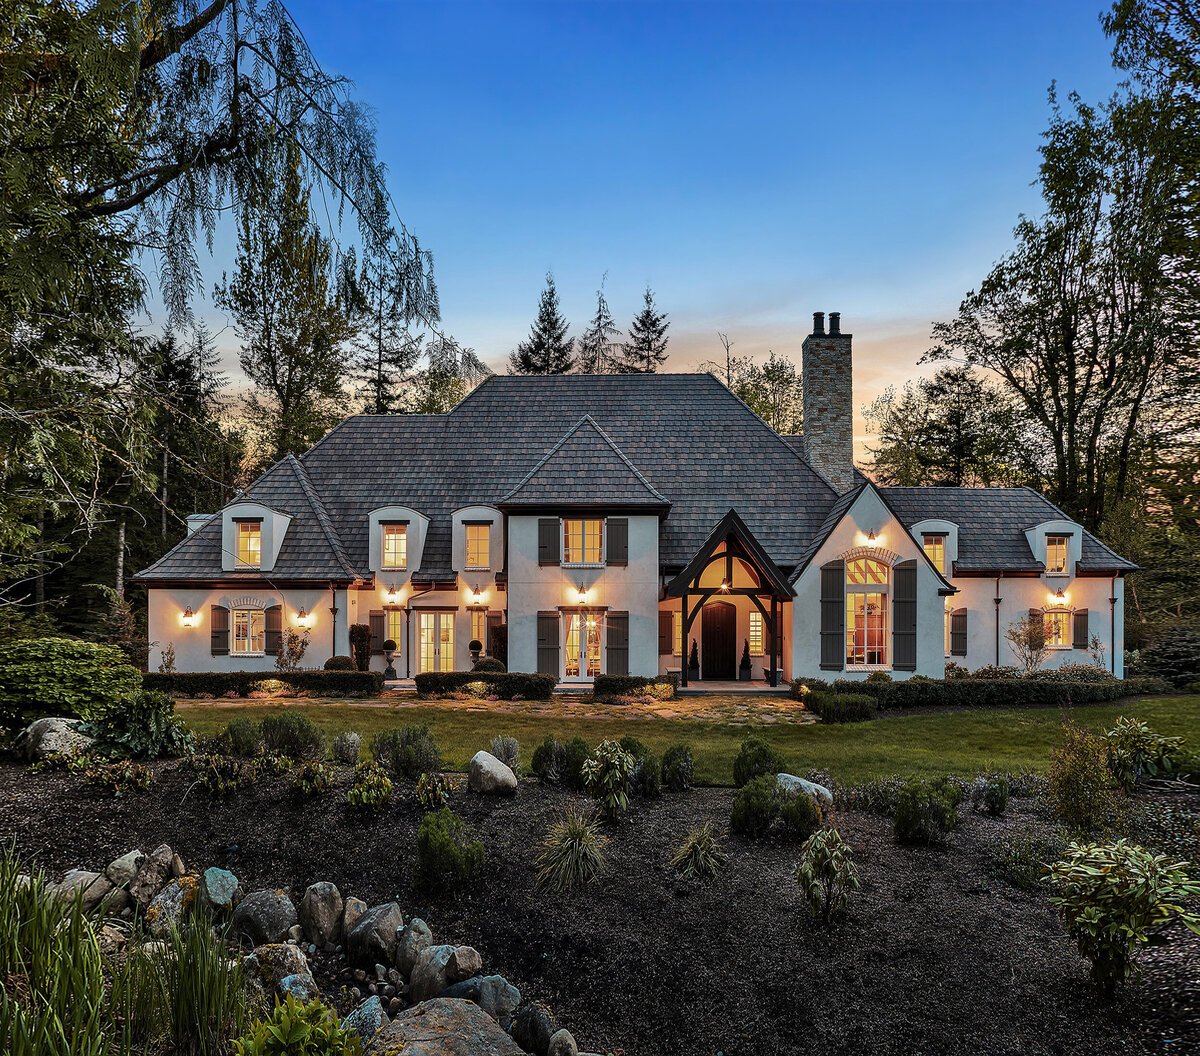 Beautiful French Chateau inspired home in Issaquah highlands - Seattle Real Estate Photography.  High End Estate Photography